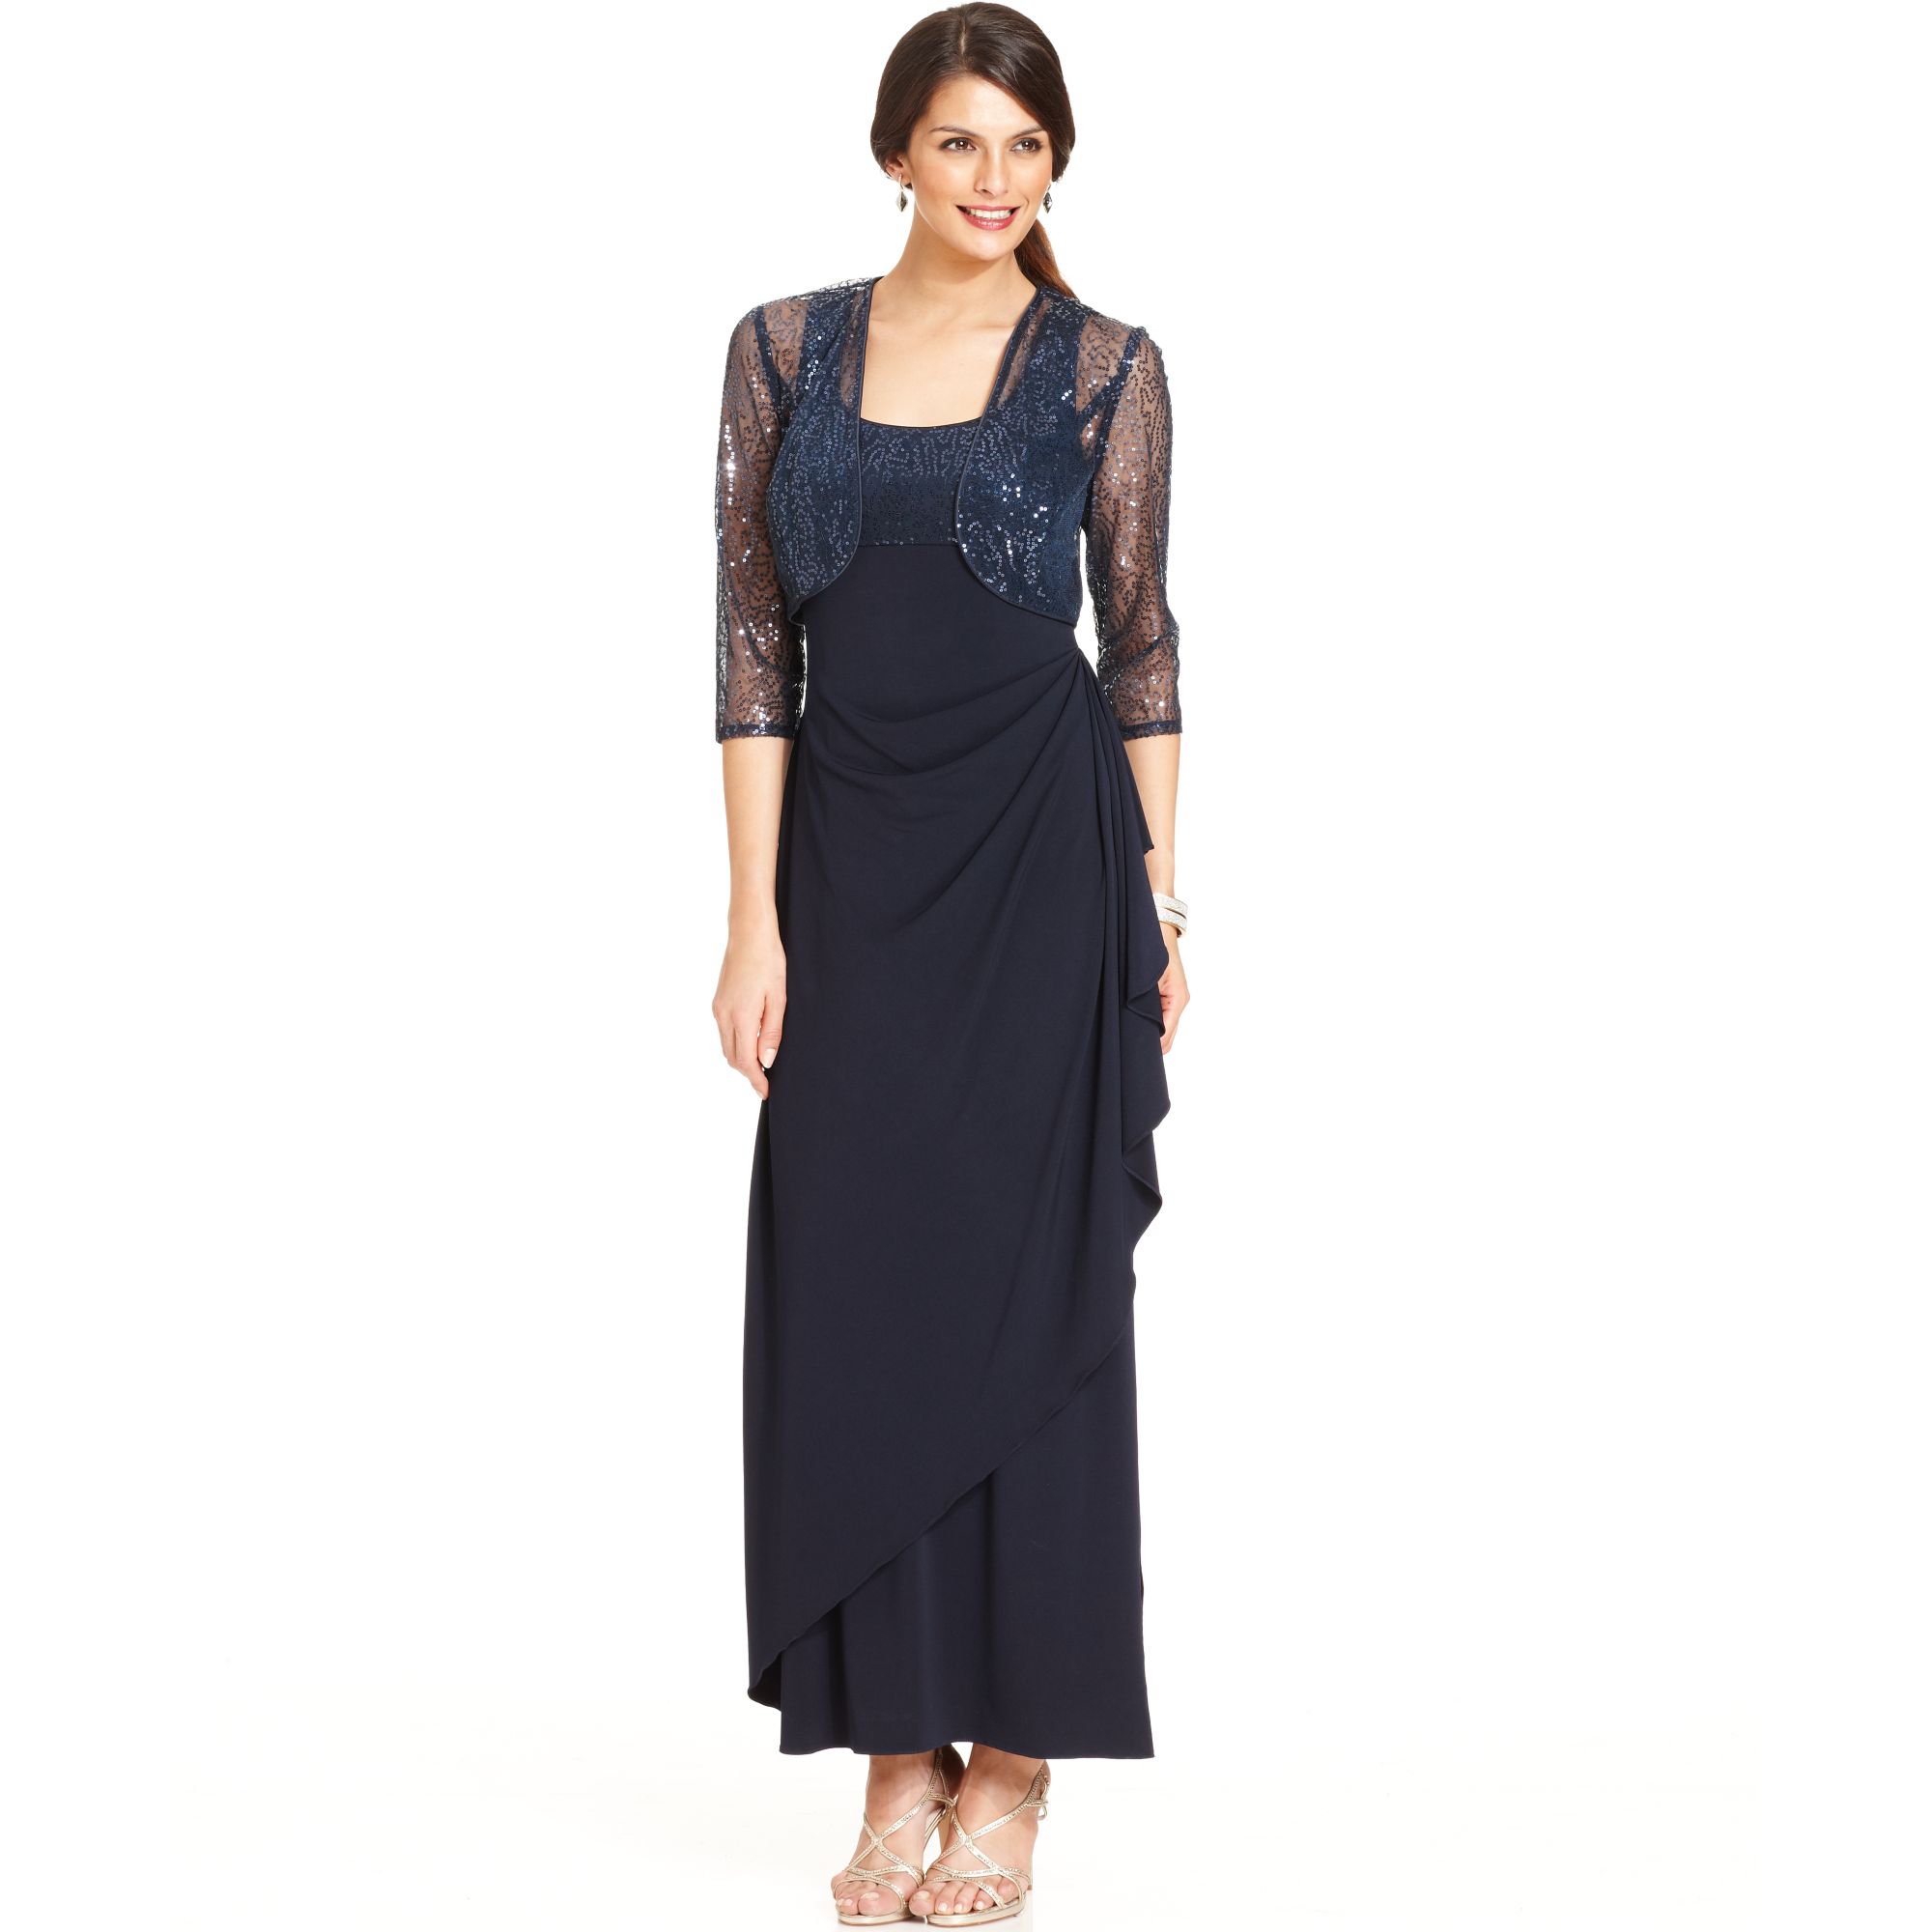 Lyst - Alex evenings Sequined Faux wrap Dress and Jacket in Blue